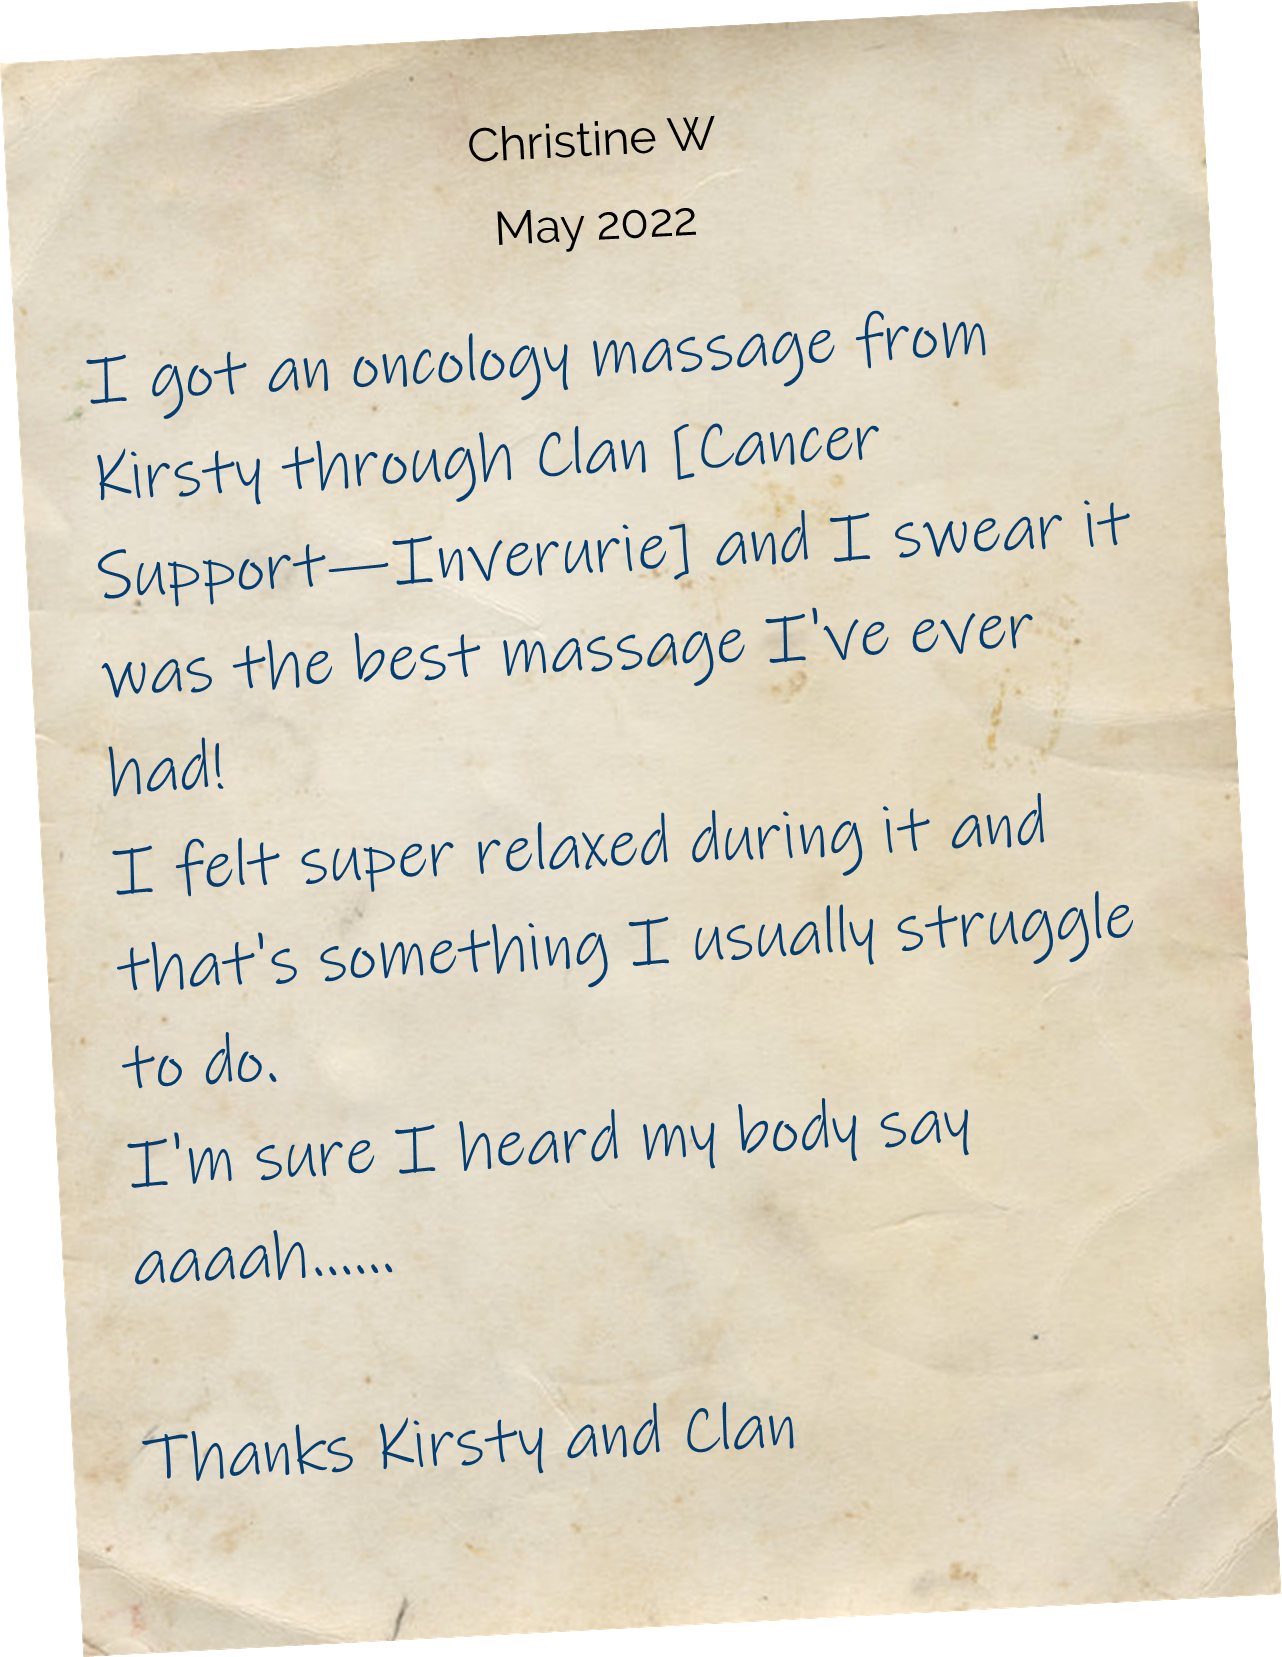 I got an oncology massage from Kirsty through Clan and I swear it was the best massage I've ever had! I felt super relaxed during it and that's something I usually struggle to do. I'm sure I heard my body say aaaah......Thanks Kirsty and Clan